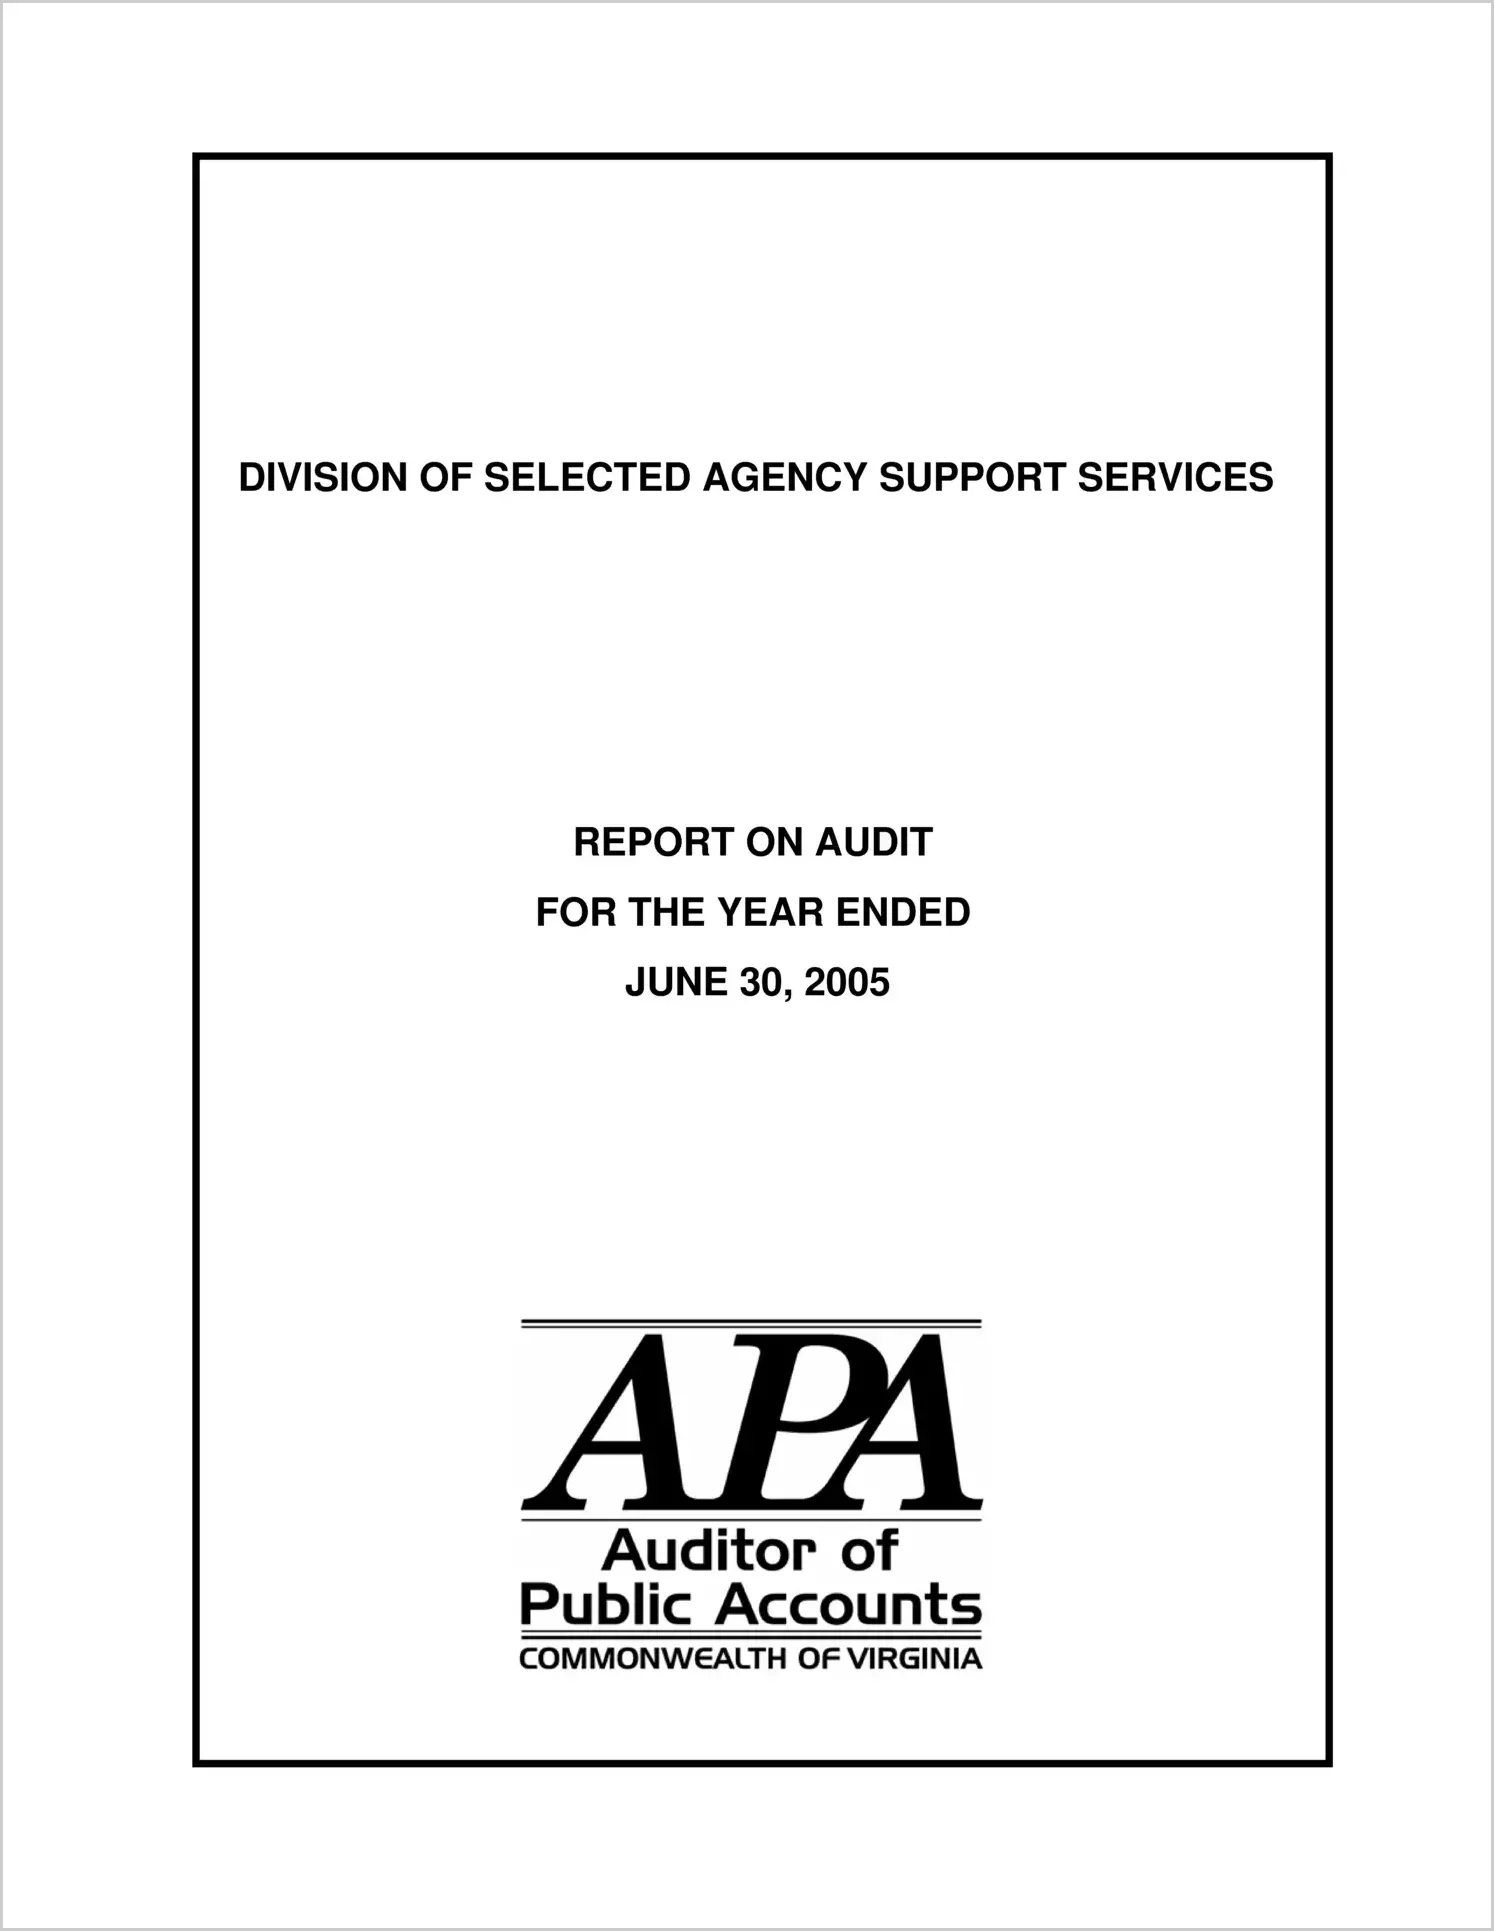 Division of Selected Agency Support Services for the year ended June 30, 2005